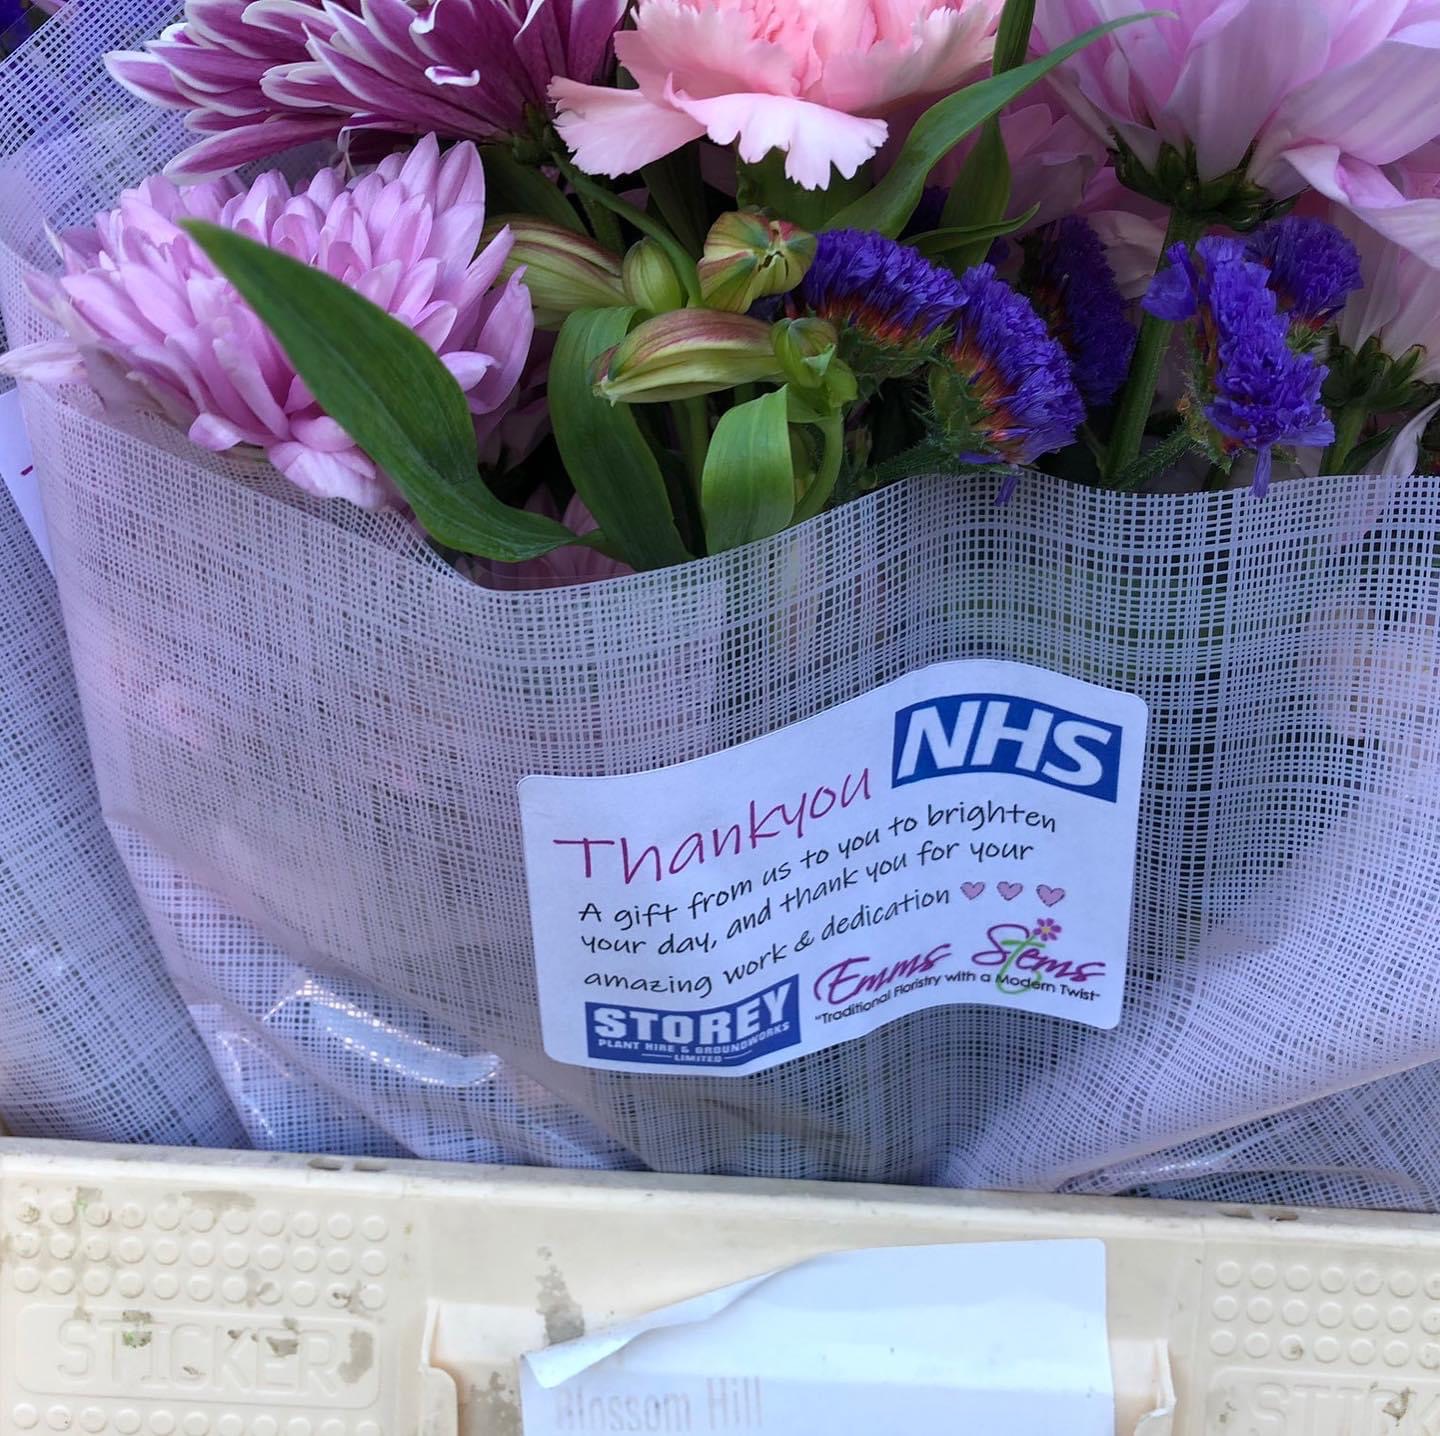 A huge thank you from NNUH